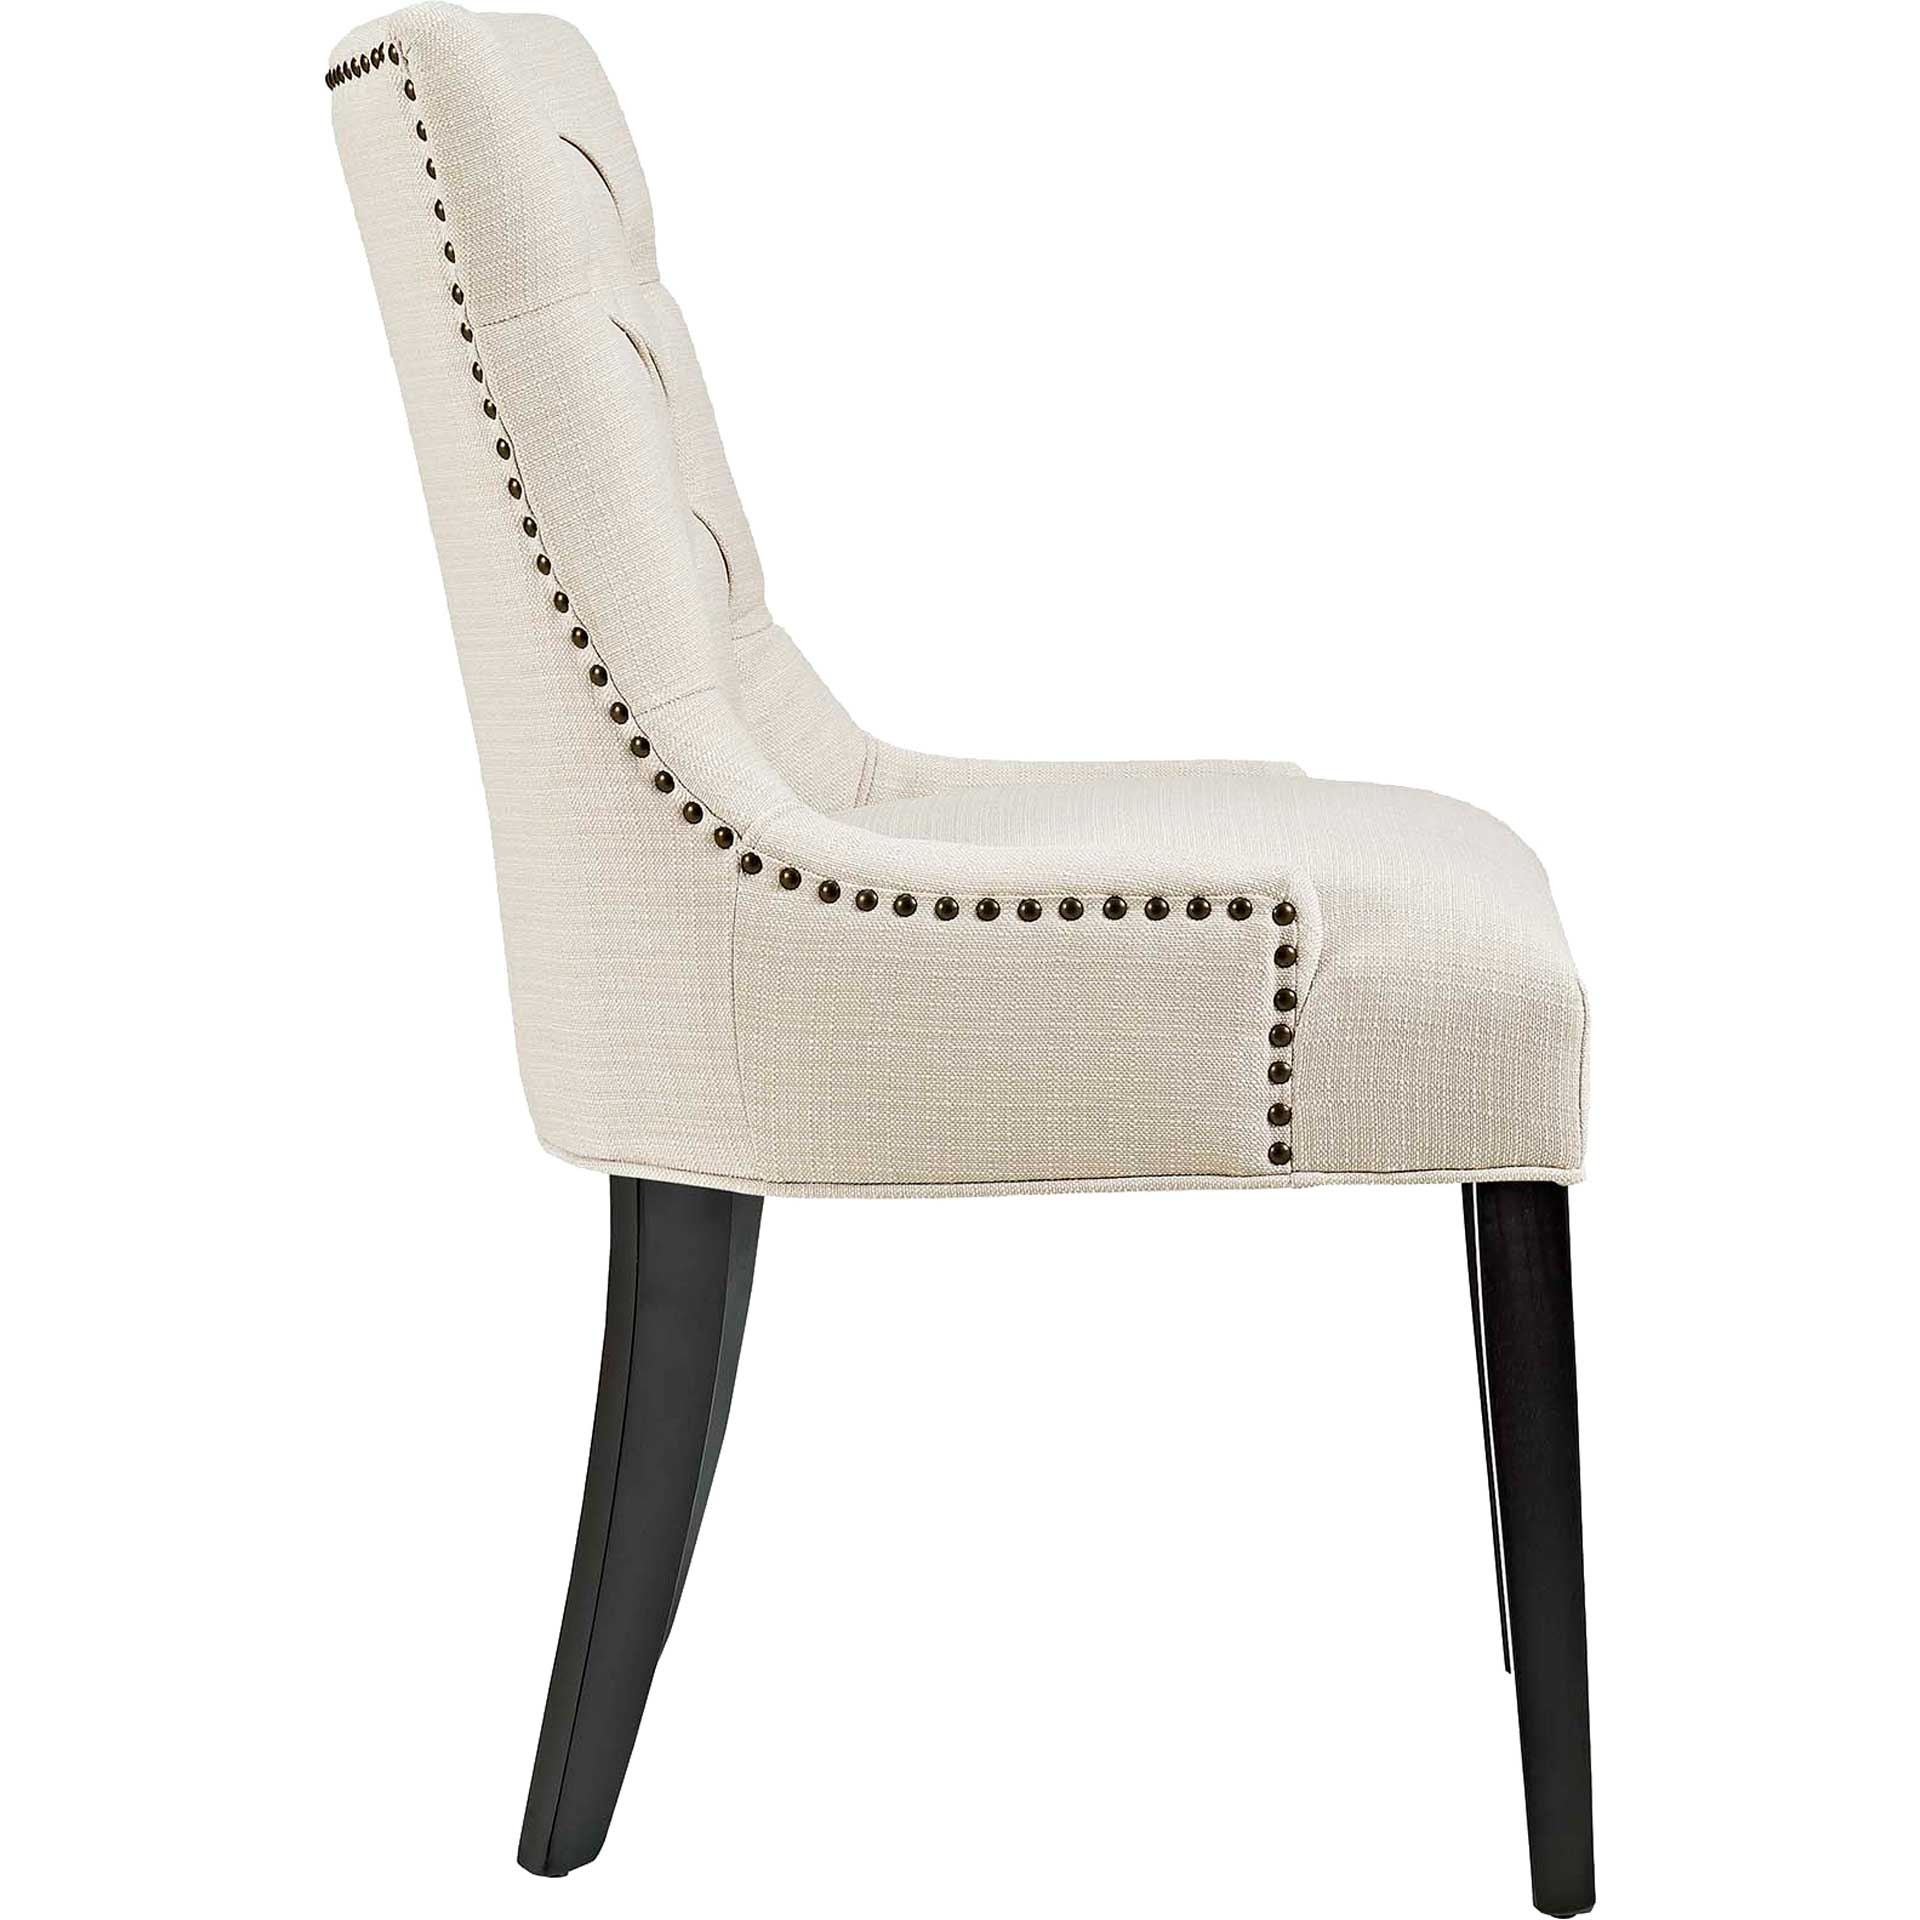 Riley Fabric Dining Chair Beige